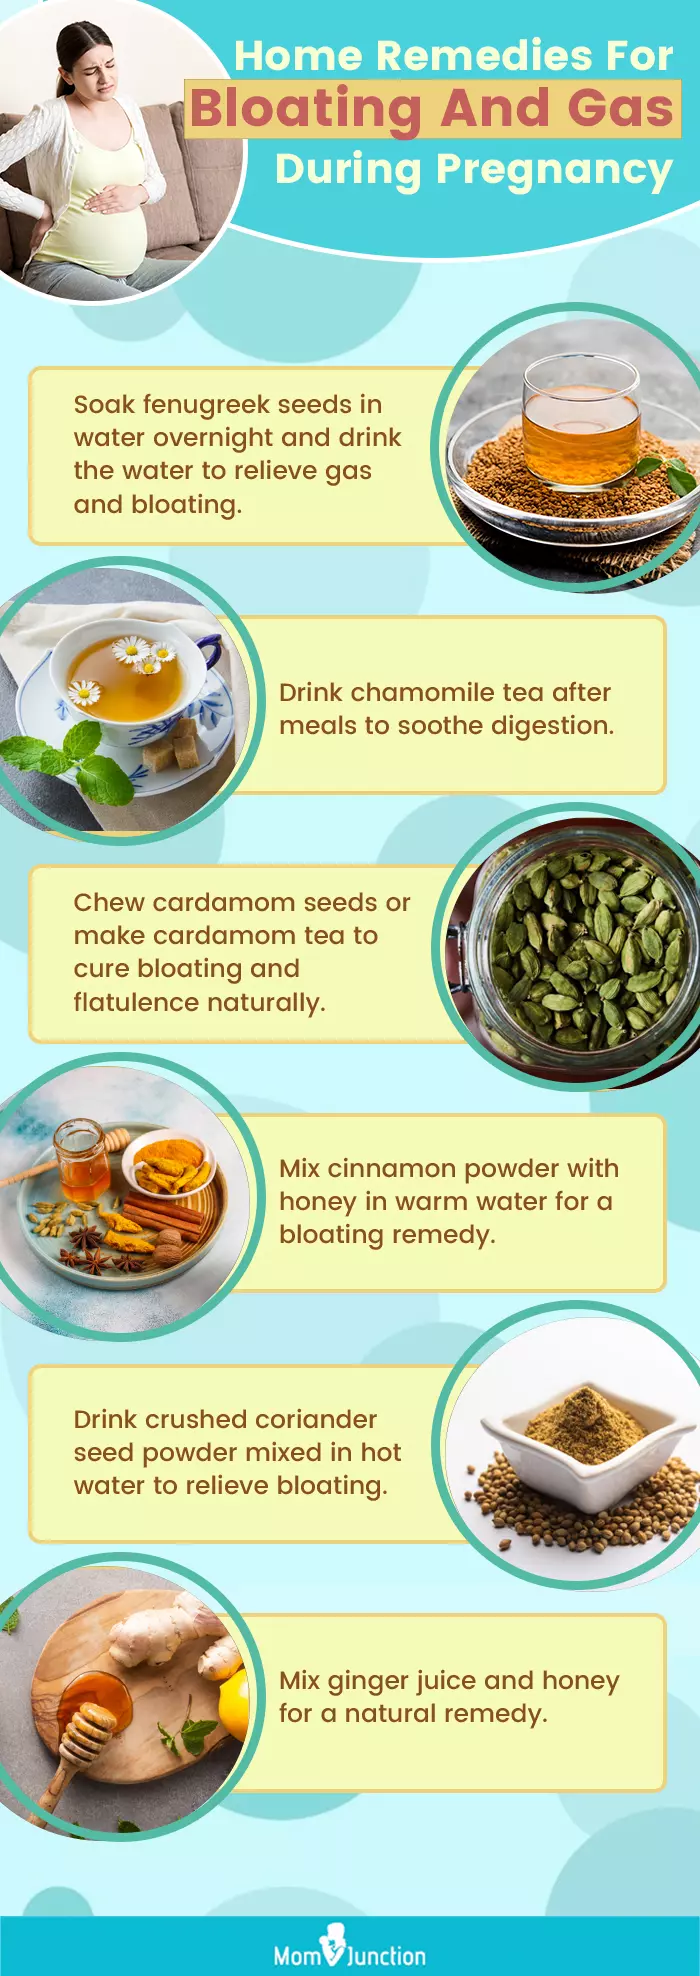 home remedies for bloating and gas during pregnancy (infographic)